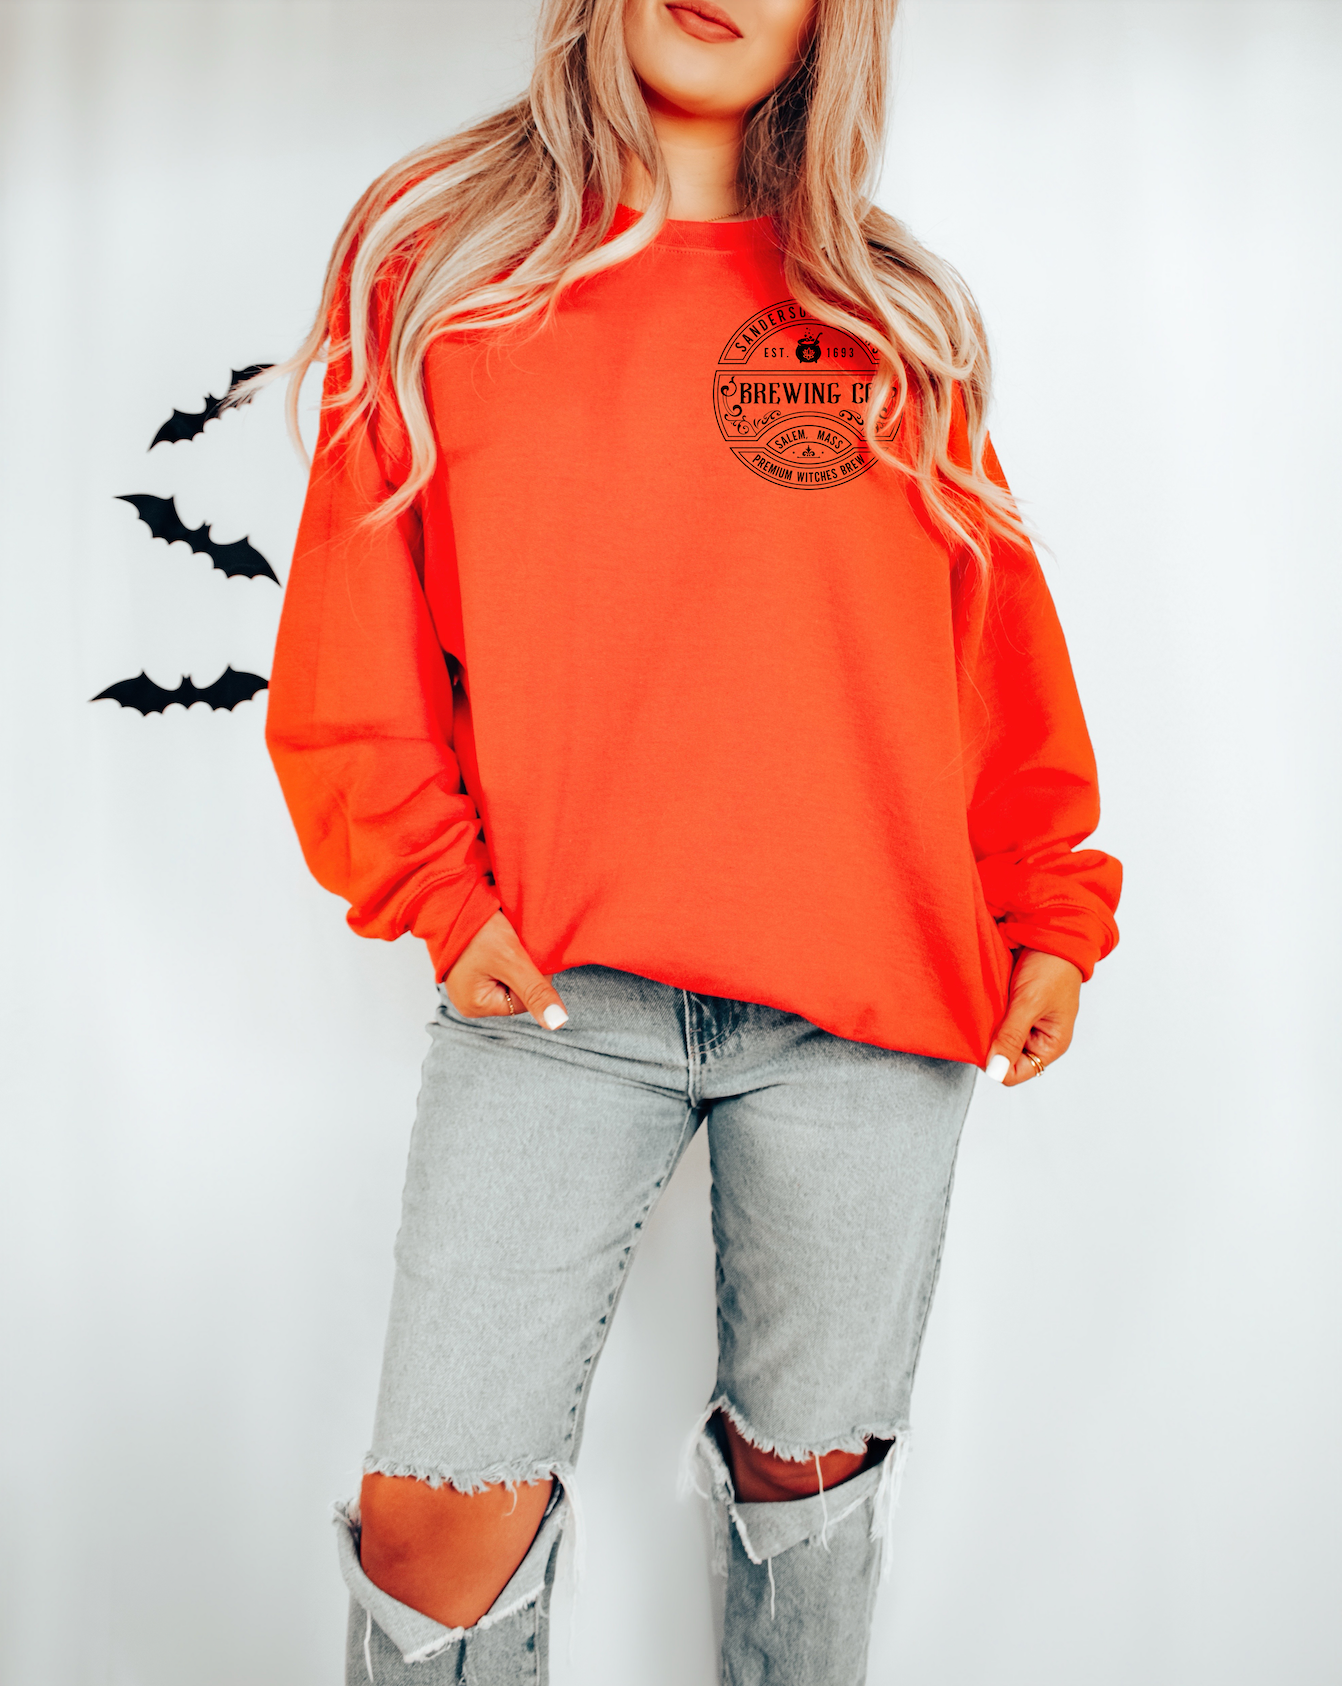 Sanderson Sisters Brewing Co. || Unisex Crew Neck Sweater